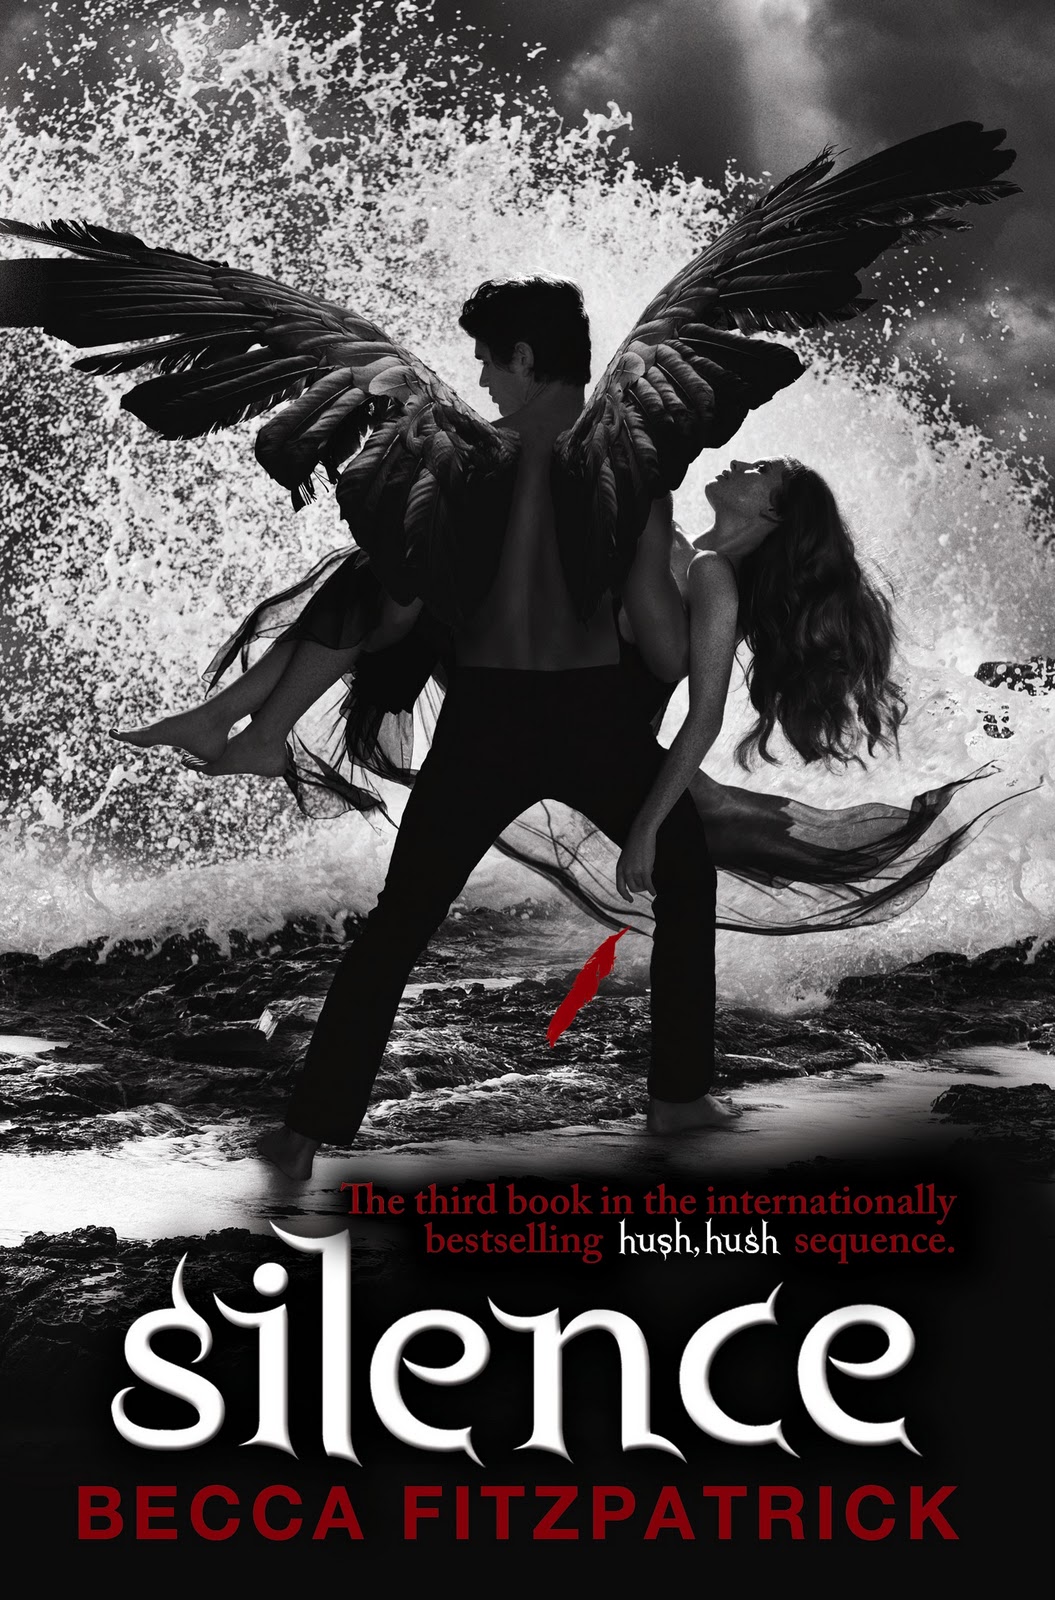 Daisy Chain Book Reviews Win A Copy Of Silence By Becca Fitzpatrick Signed By The Author And